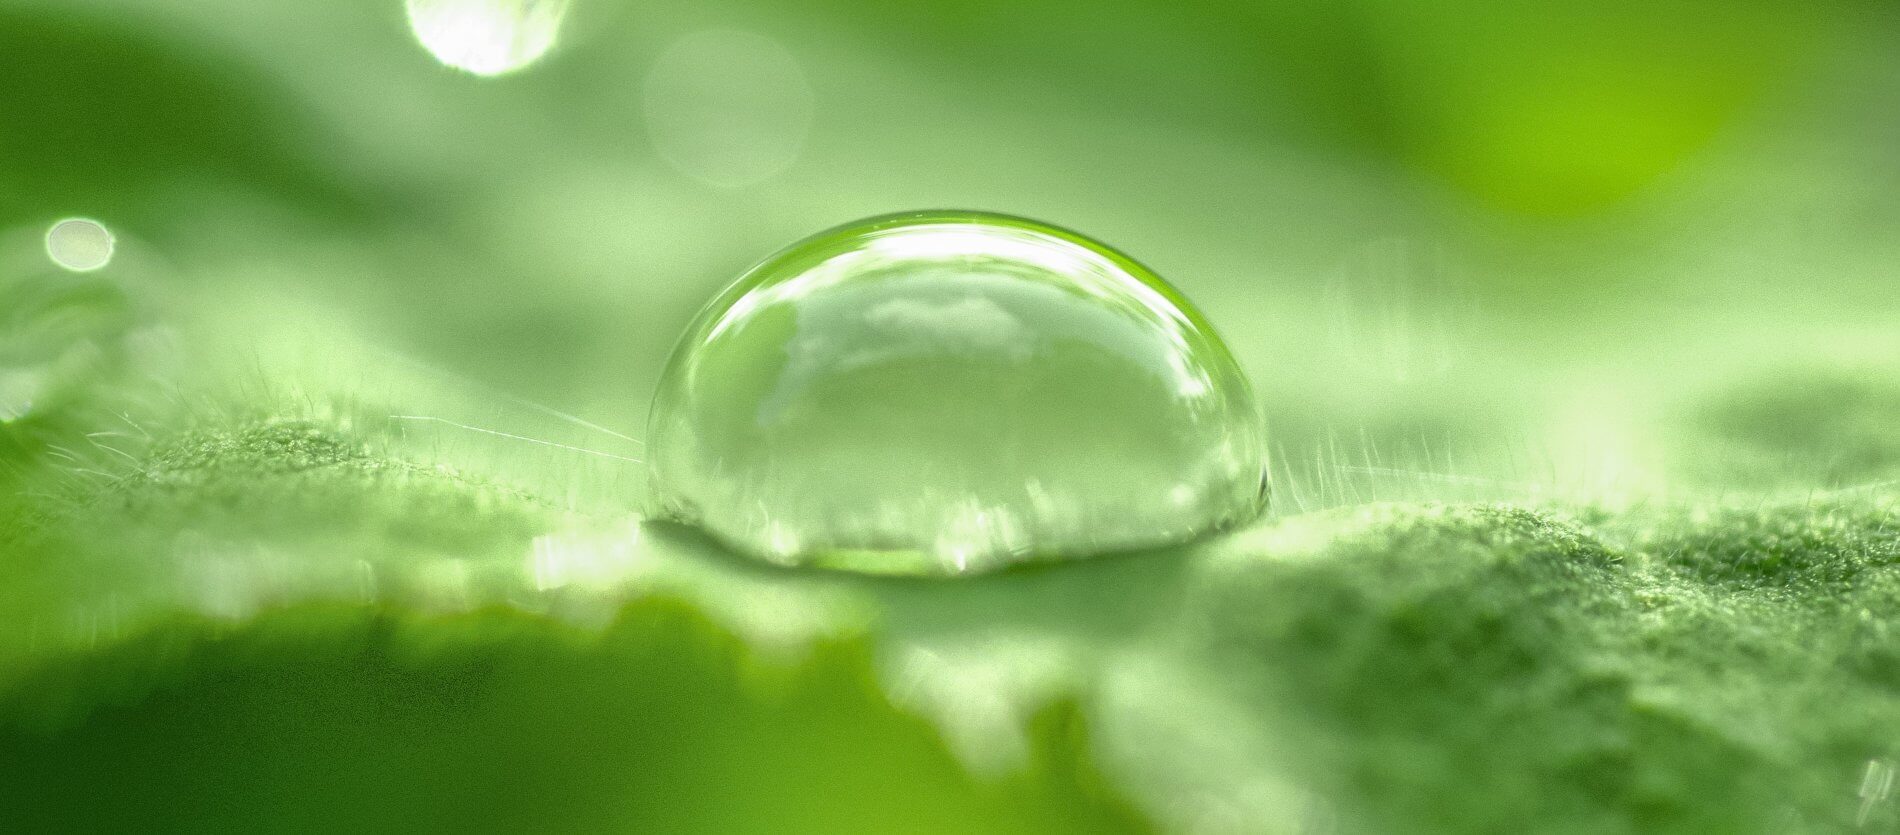 A close up of a water droplet on a green leafed surface